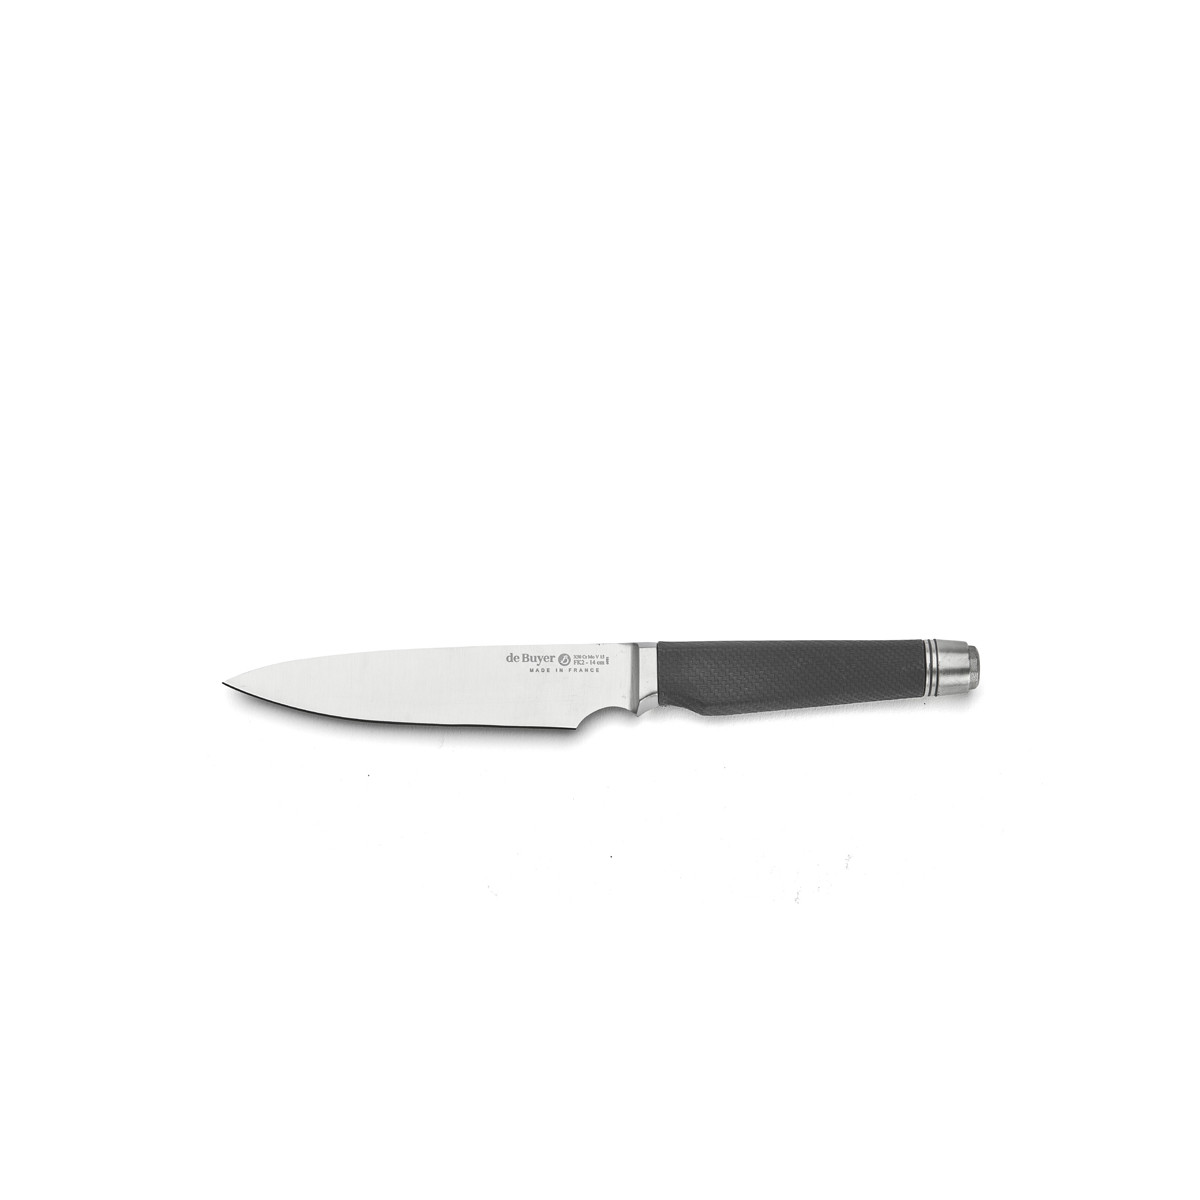 SERVING KNIFE FK2, stainless utility - 14cm, OUTDOOR - Buyer